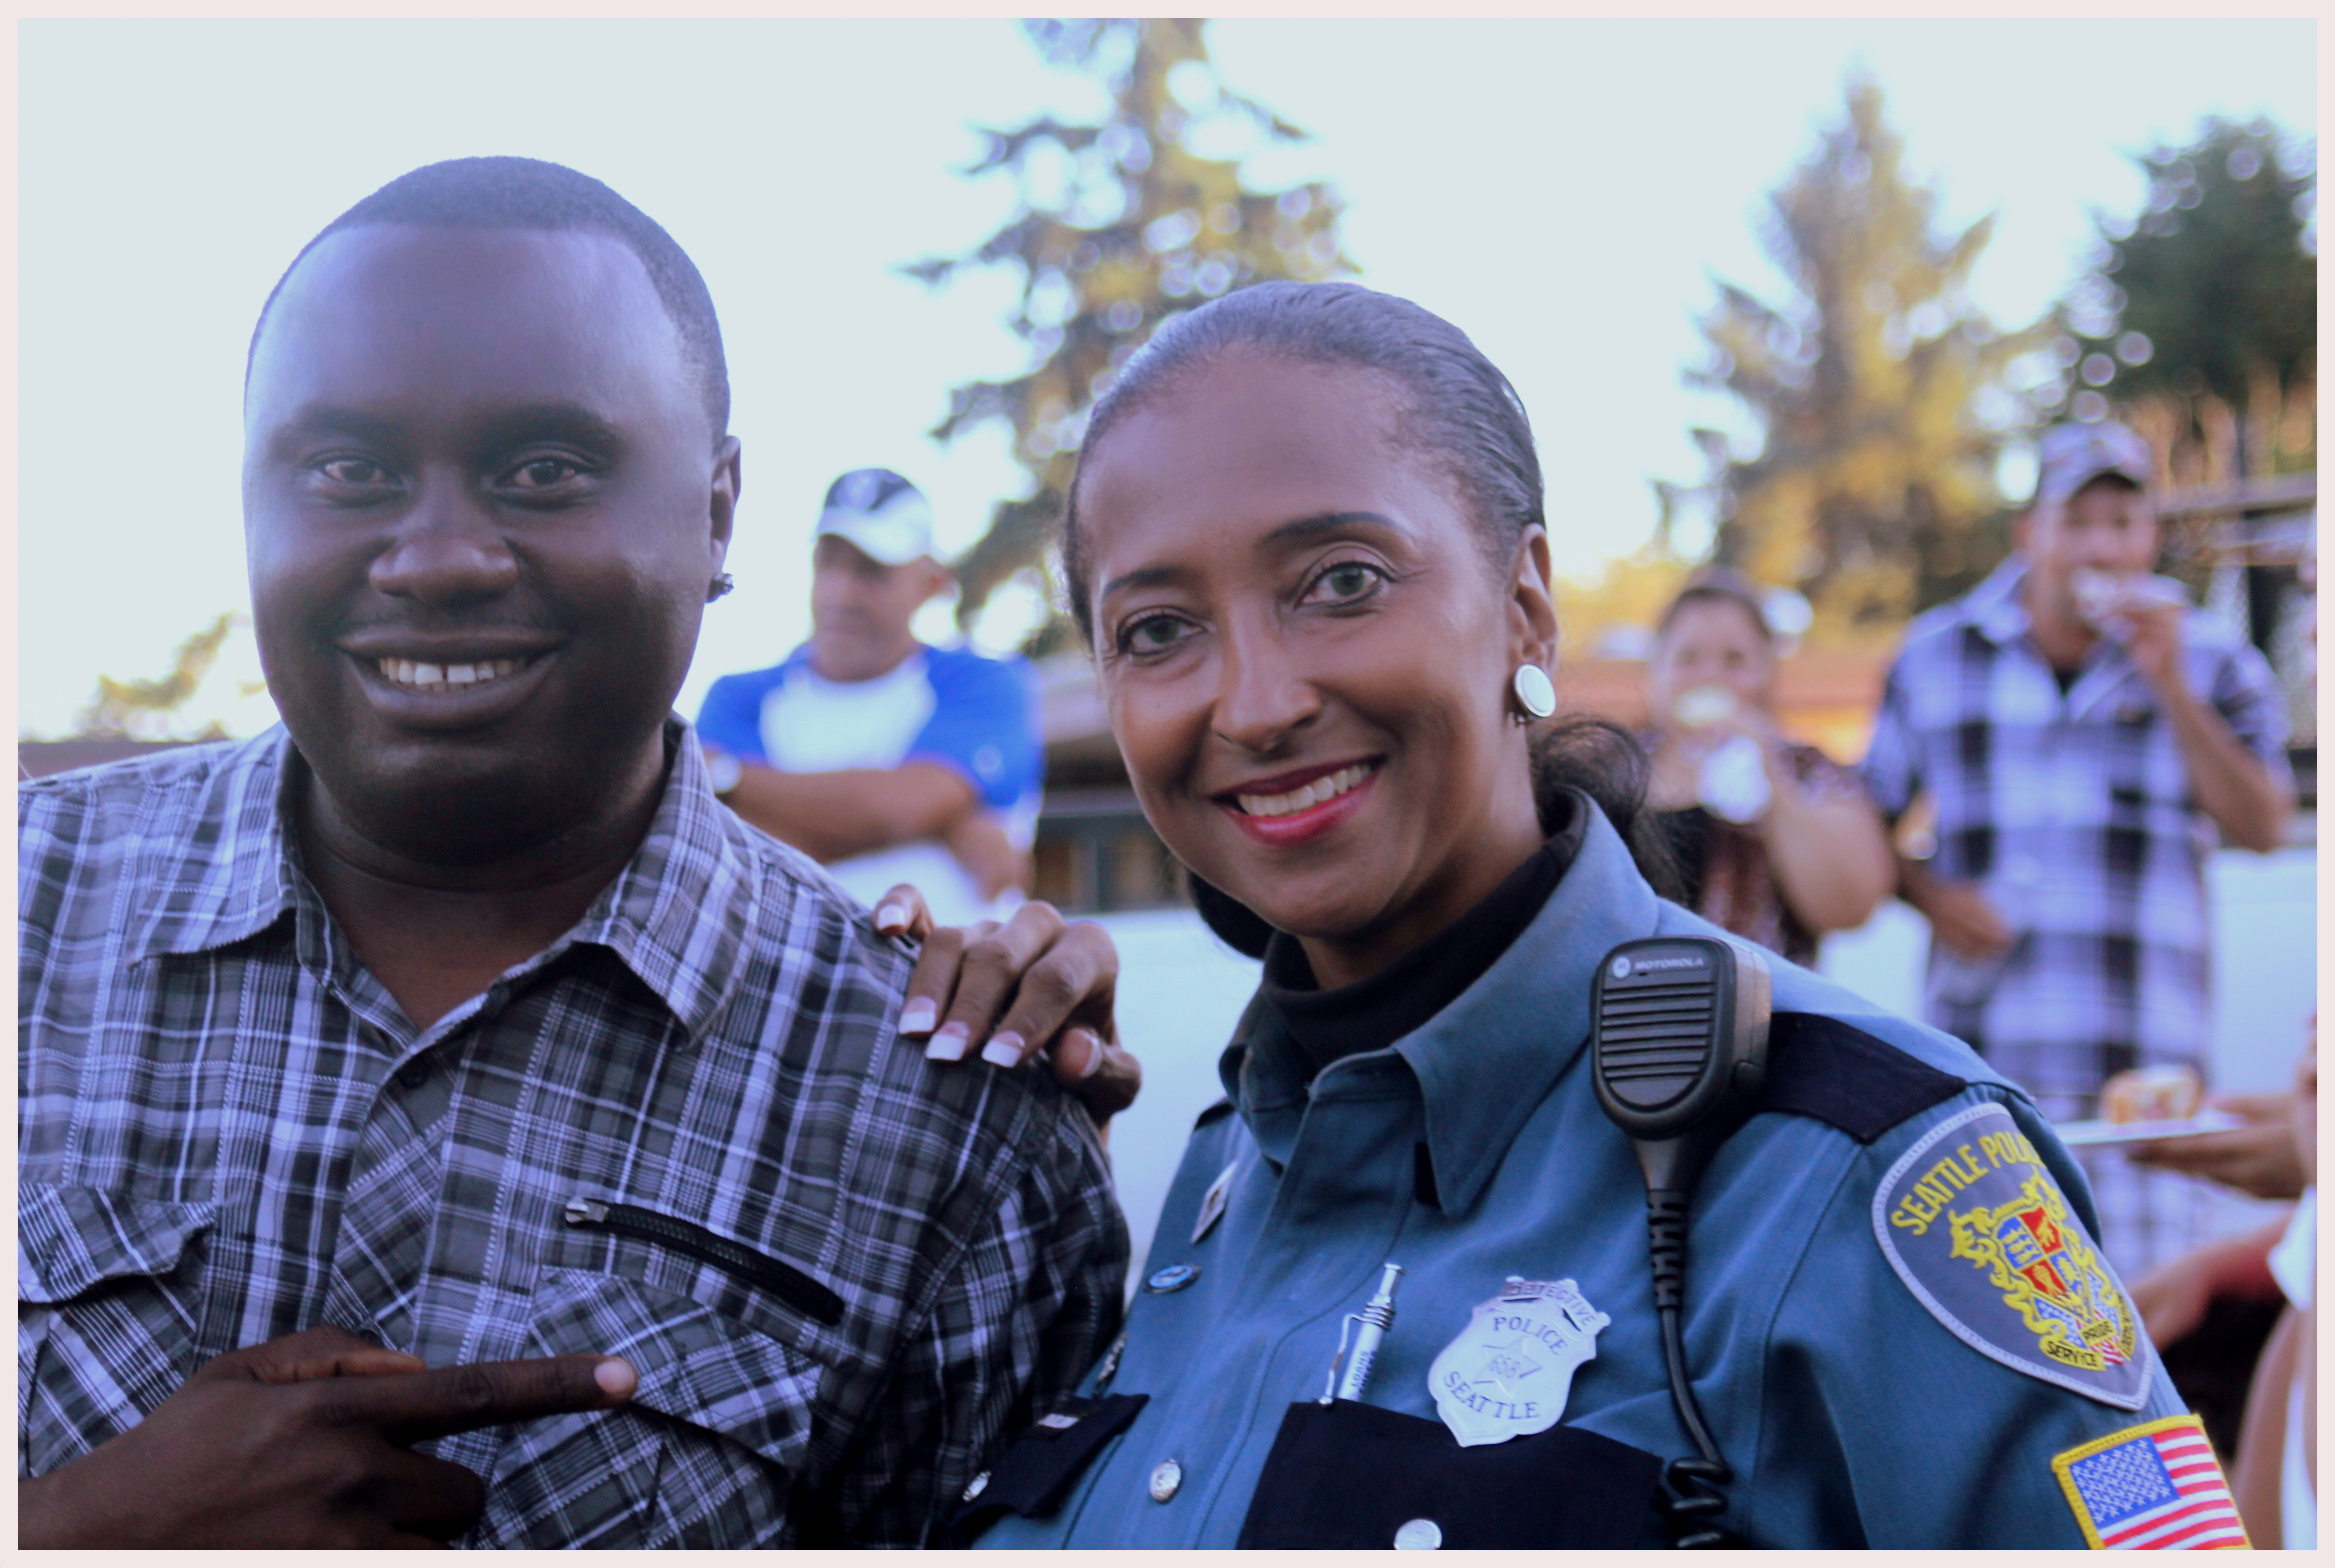 Community Crime Prevention with Seattle Police